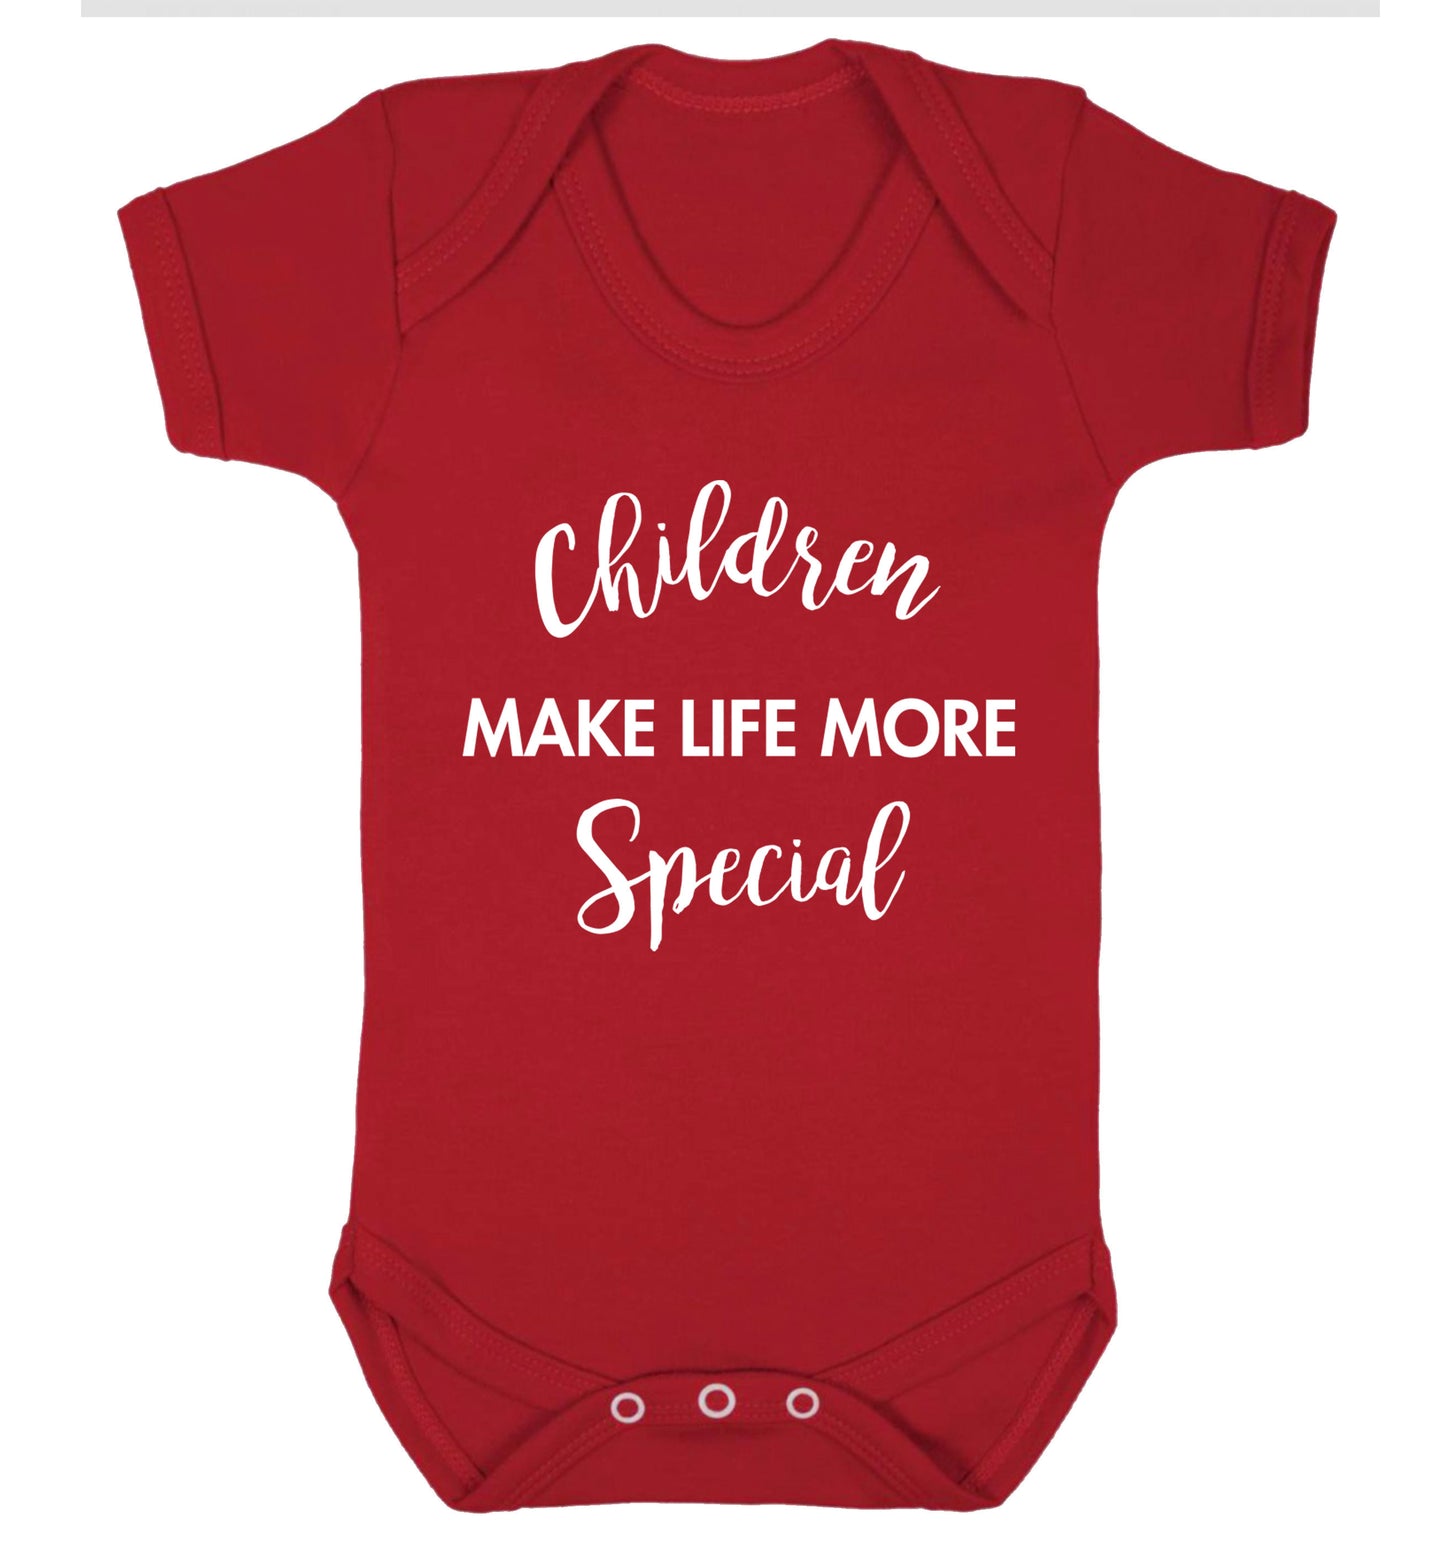 Children make life more special Baby Vest red 18-24 months